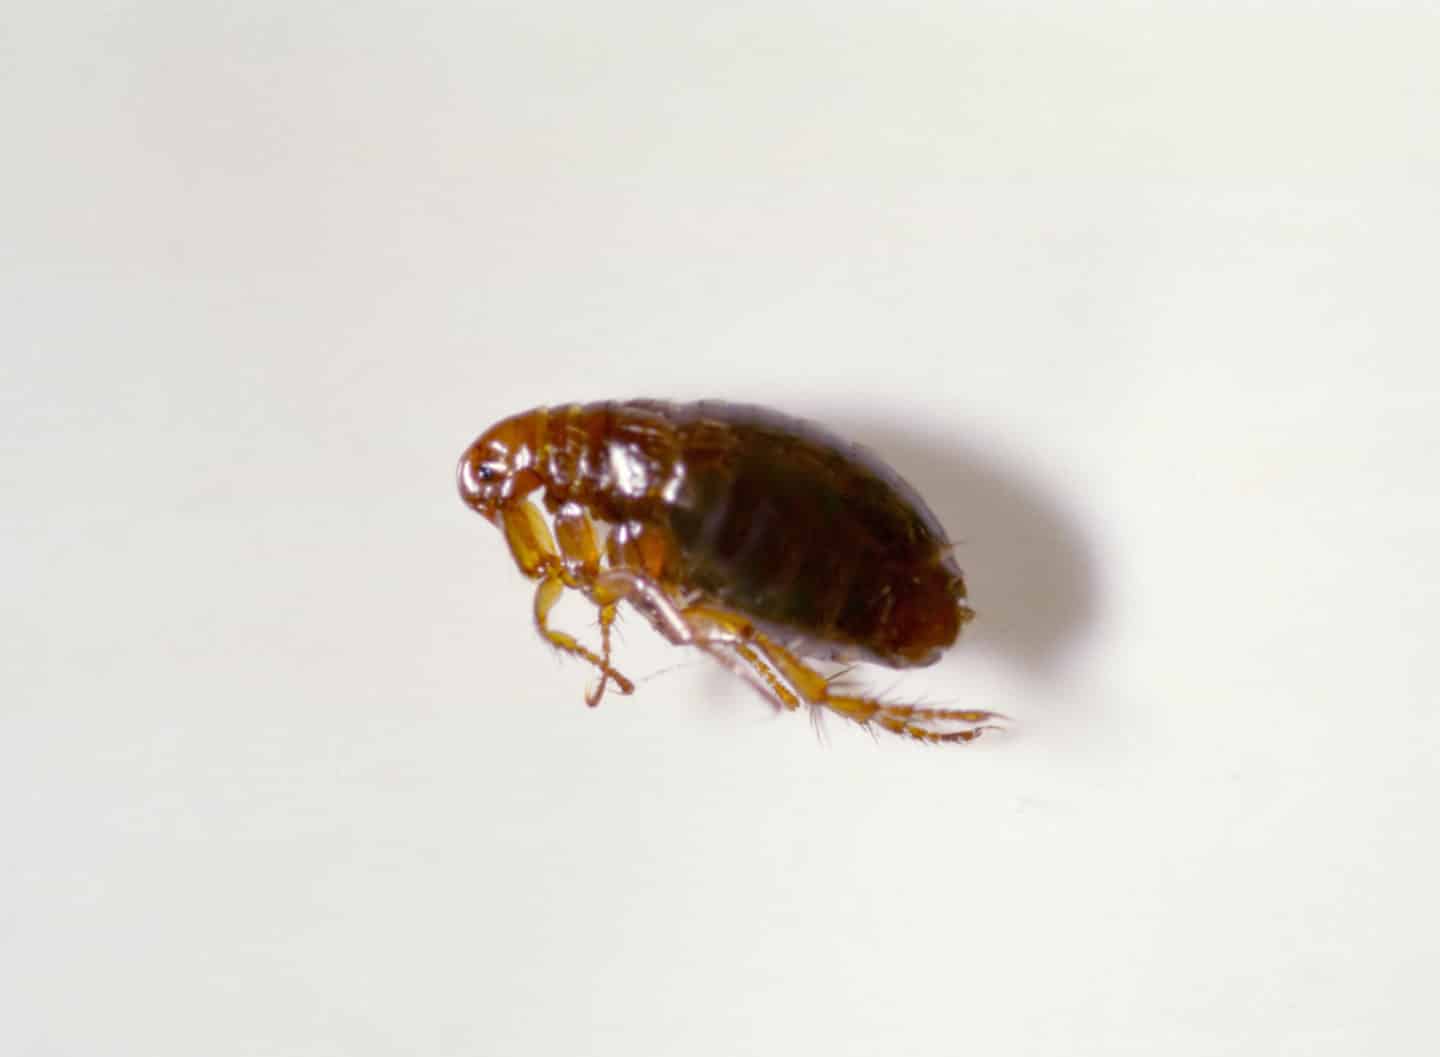 facts on fleas and pest control